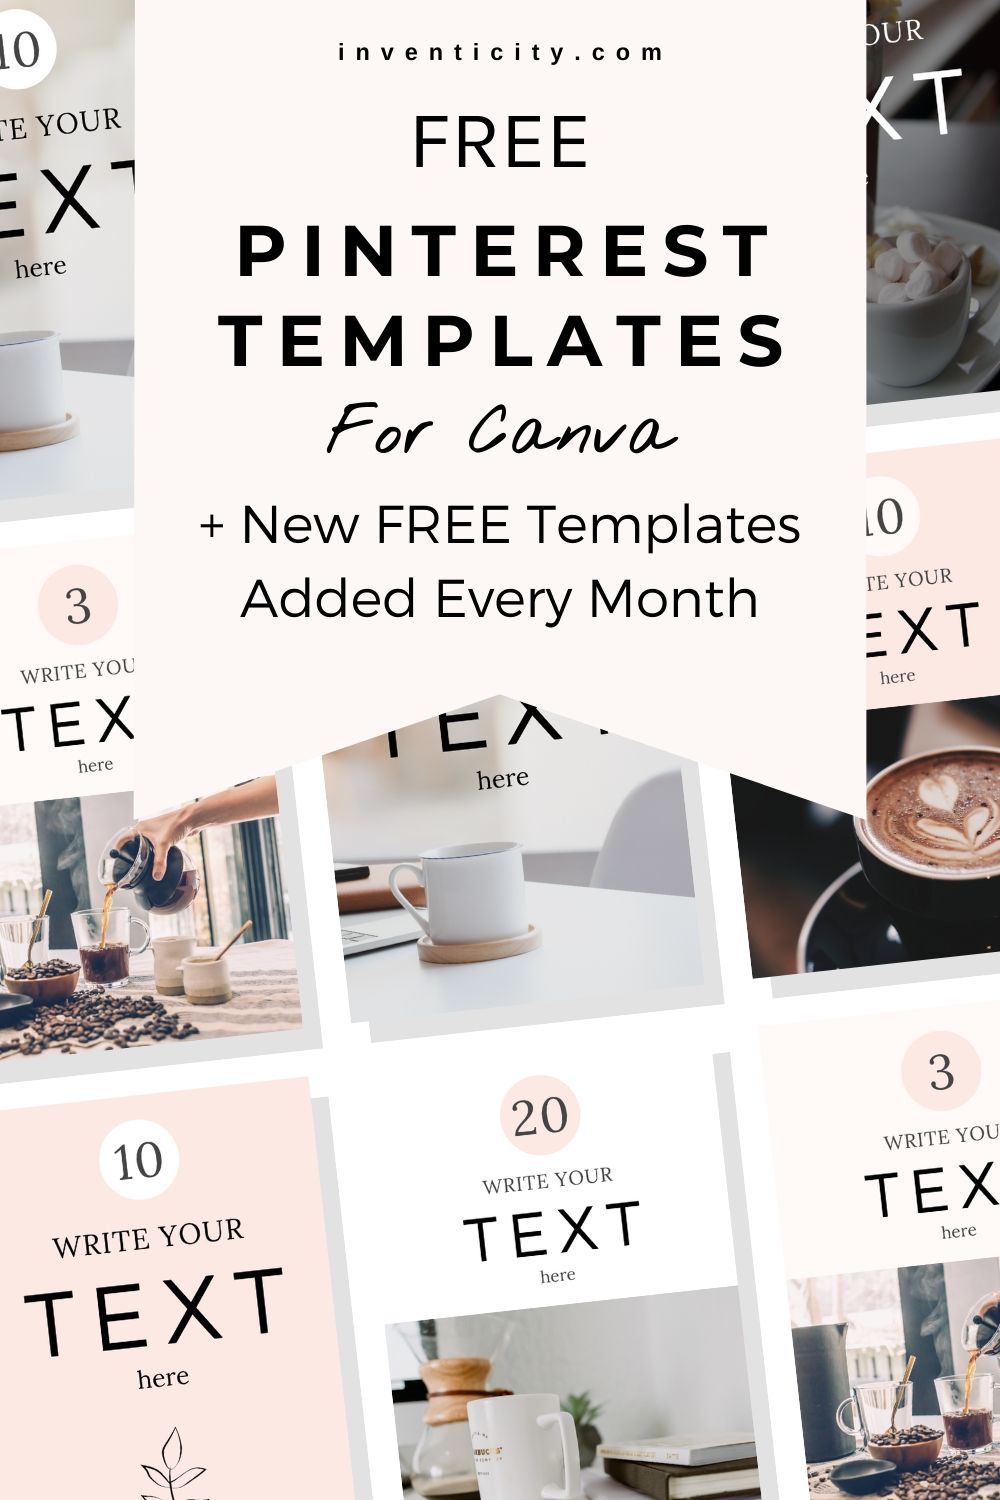 Free Pinterest Templates for Canva Inventicity™